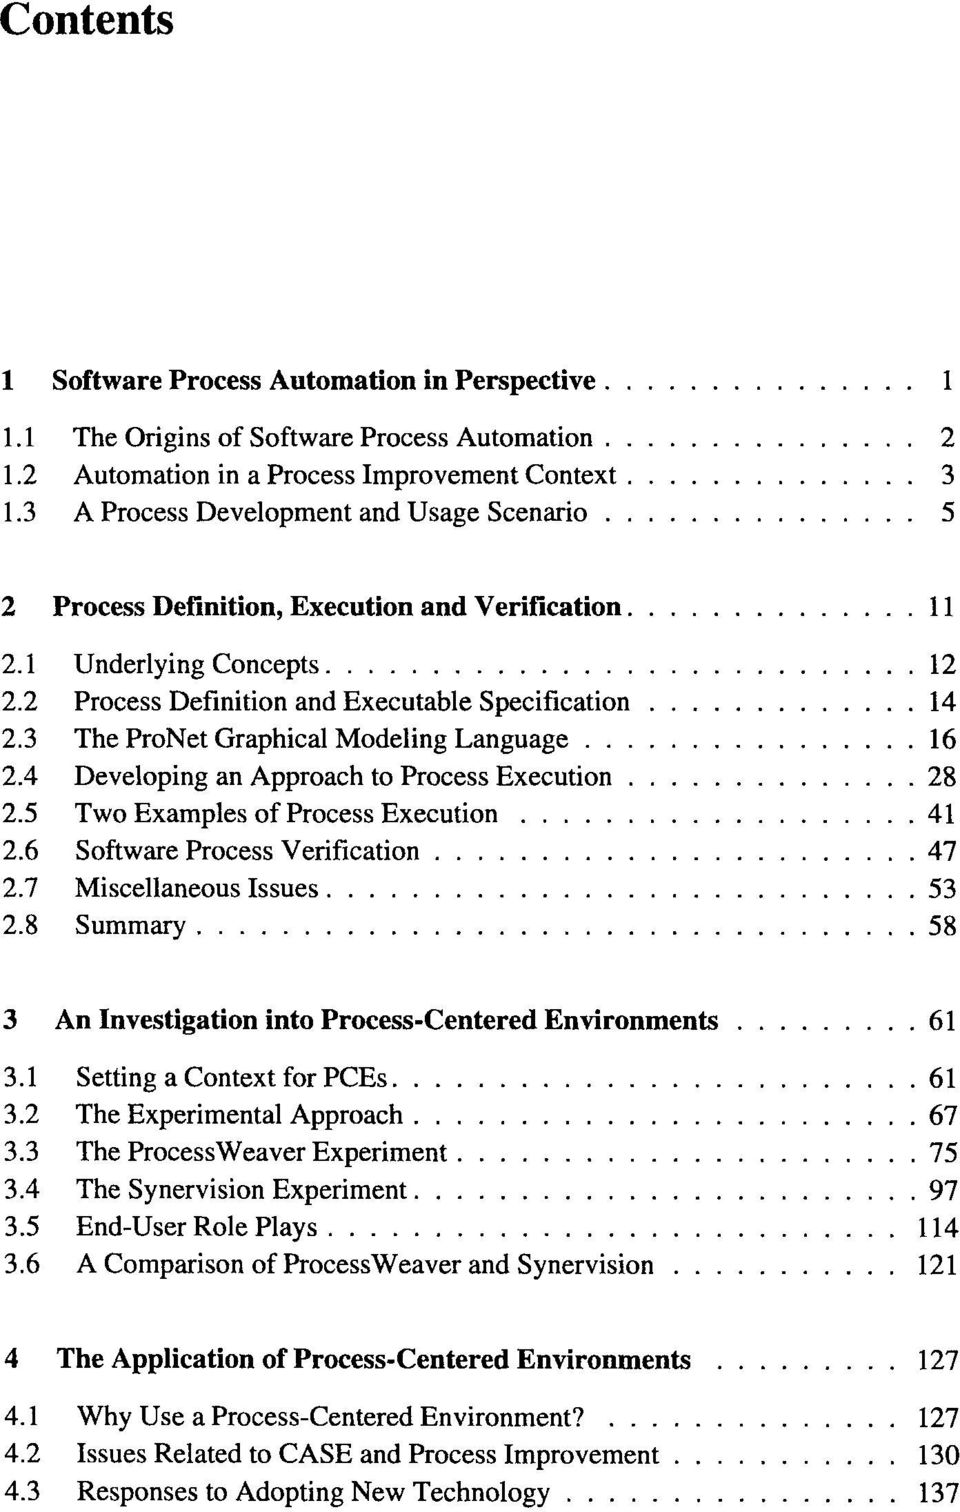 3 The ProNet Graphical Modeling Language.. 16 2.4 Developing an Approach to Process Execution 28 2.5 Two Examples of Process Execution 41 2.6 Software Process Verification.47 2.7 Miscellaneous Issues.